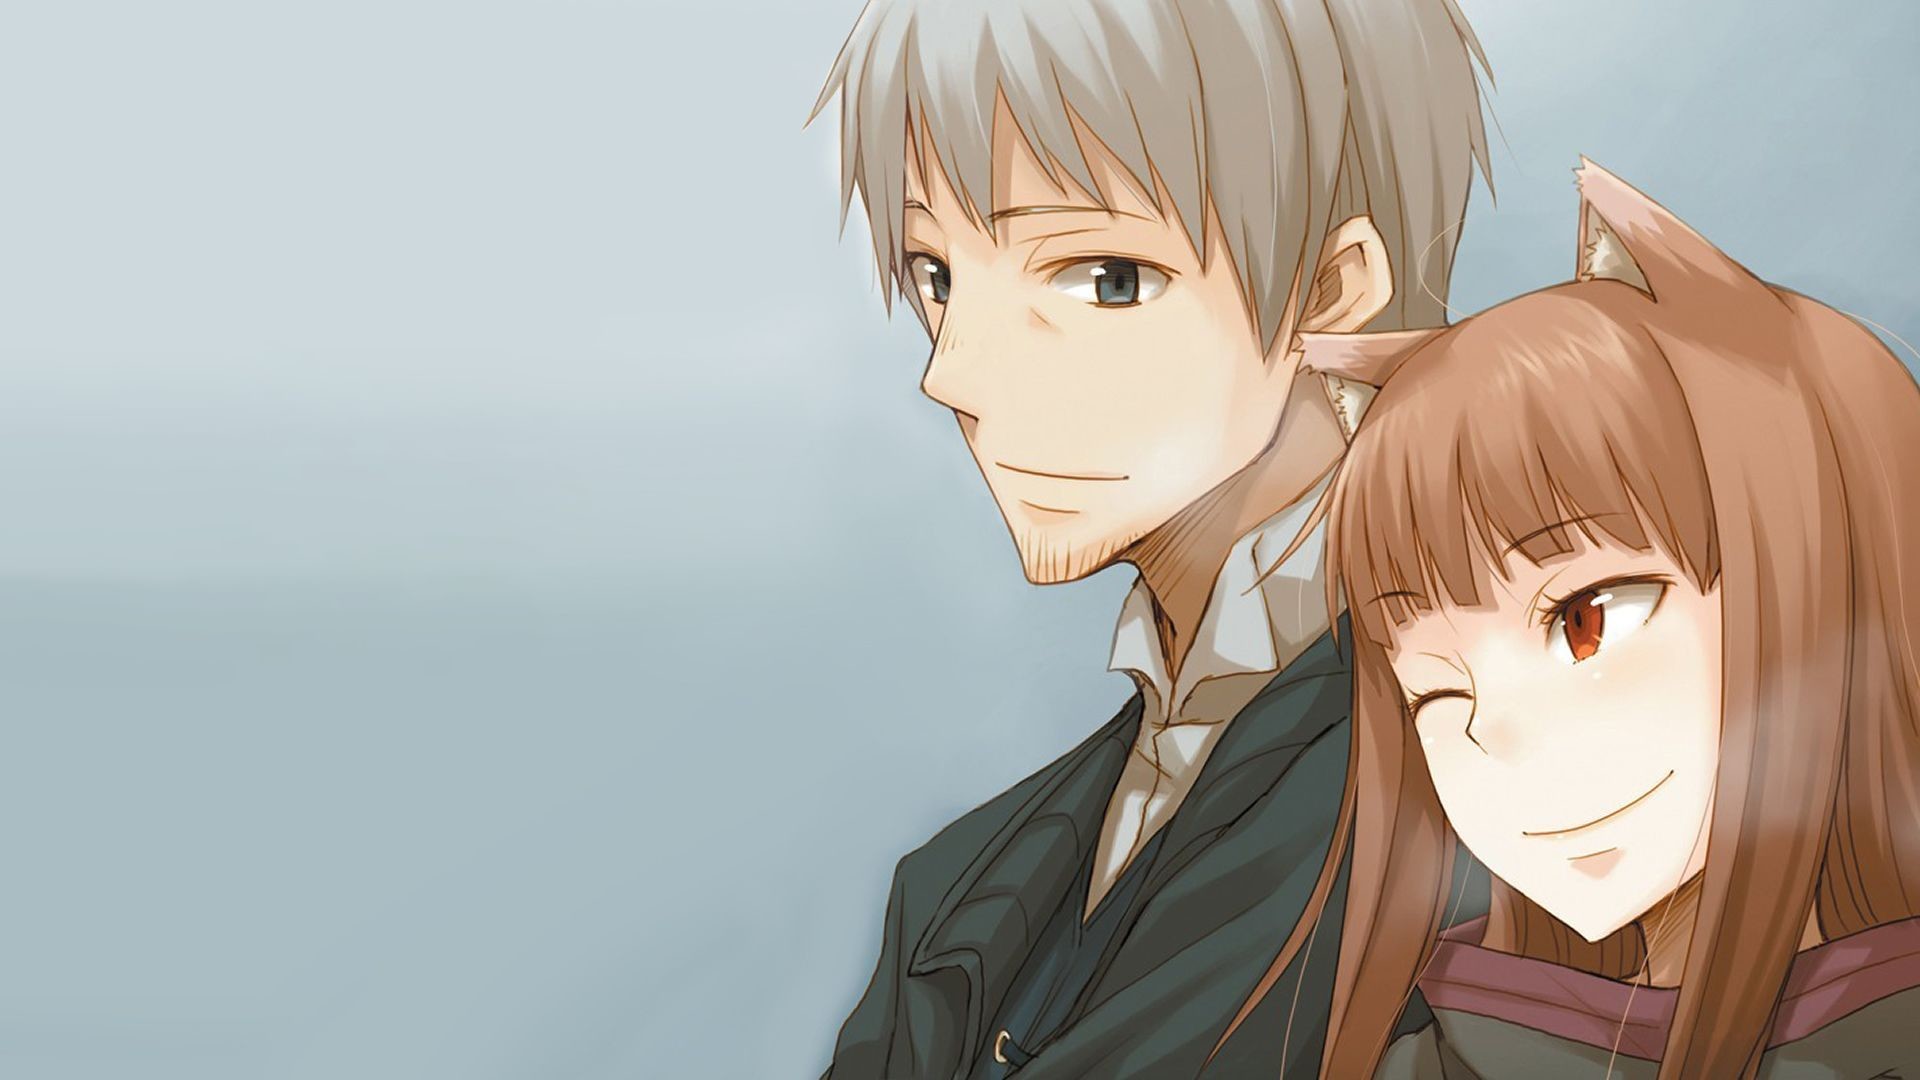 1920x1080 ... Spice And Wolf Widescreen Wallpaper - #7223 ...